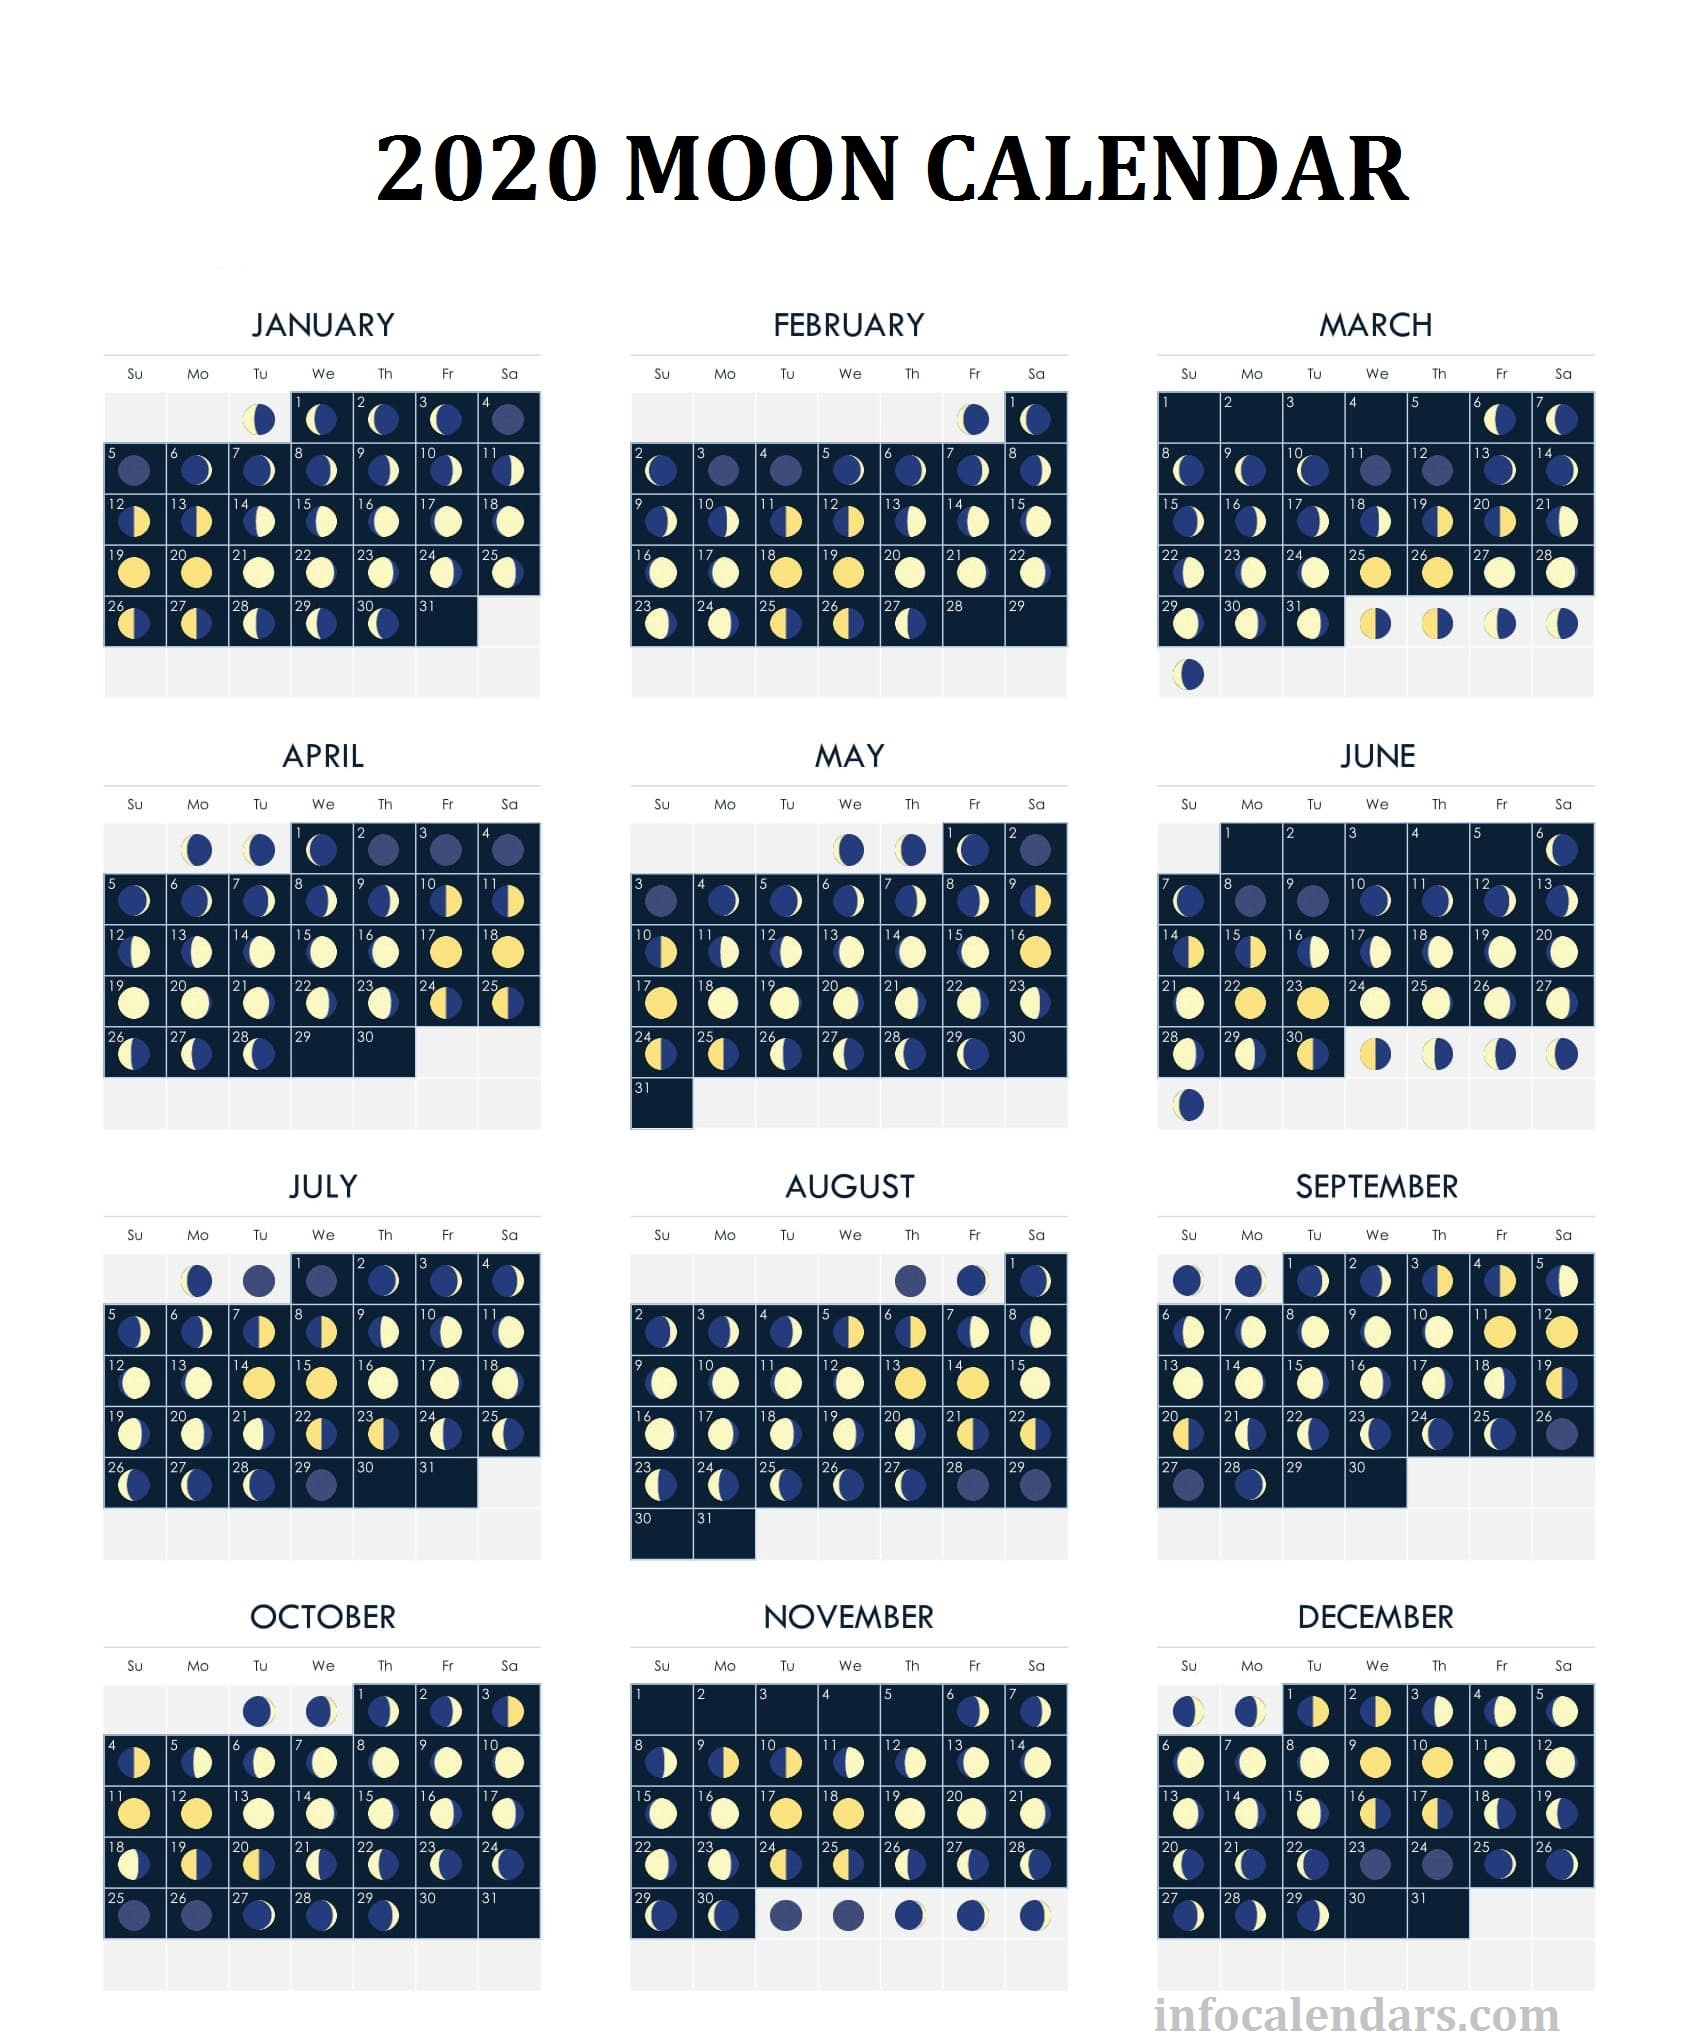 Printable 2020 Calendar For Your Yearly Trip - Infocalendars